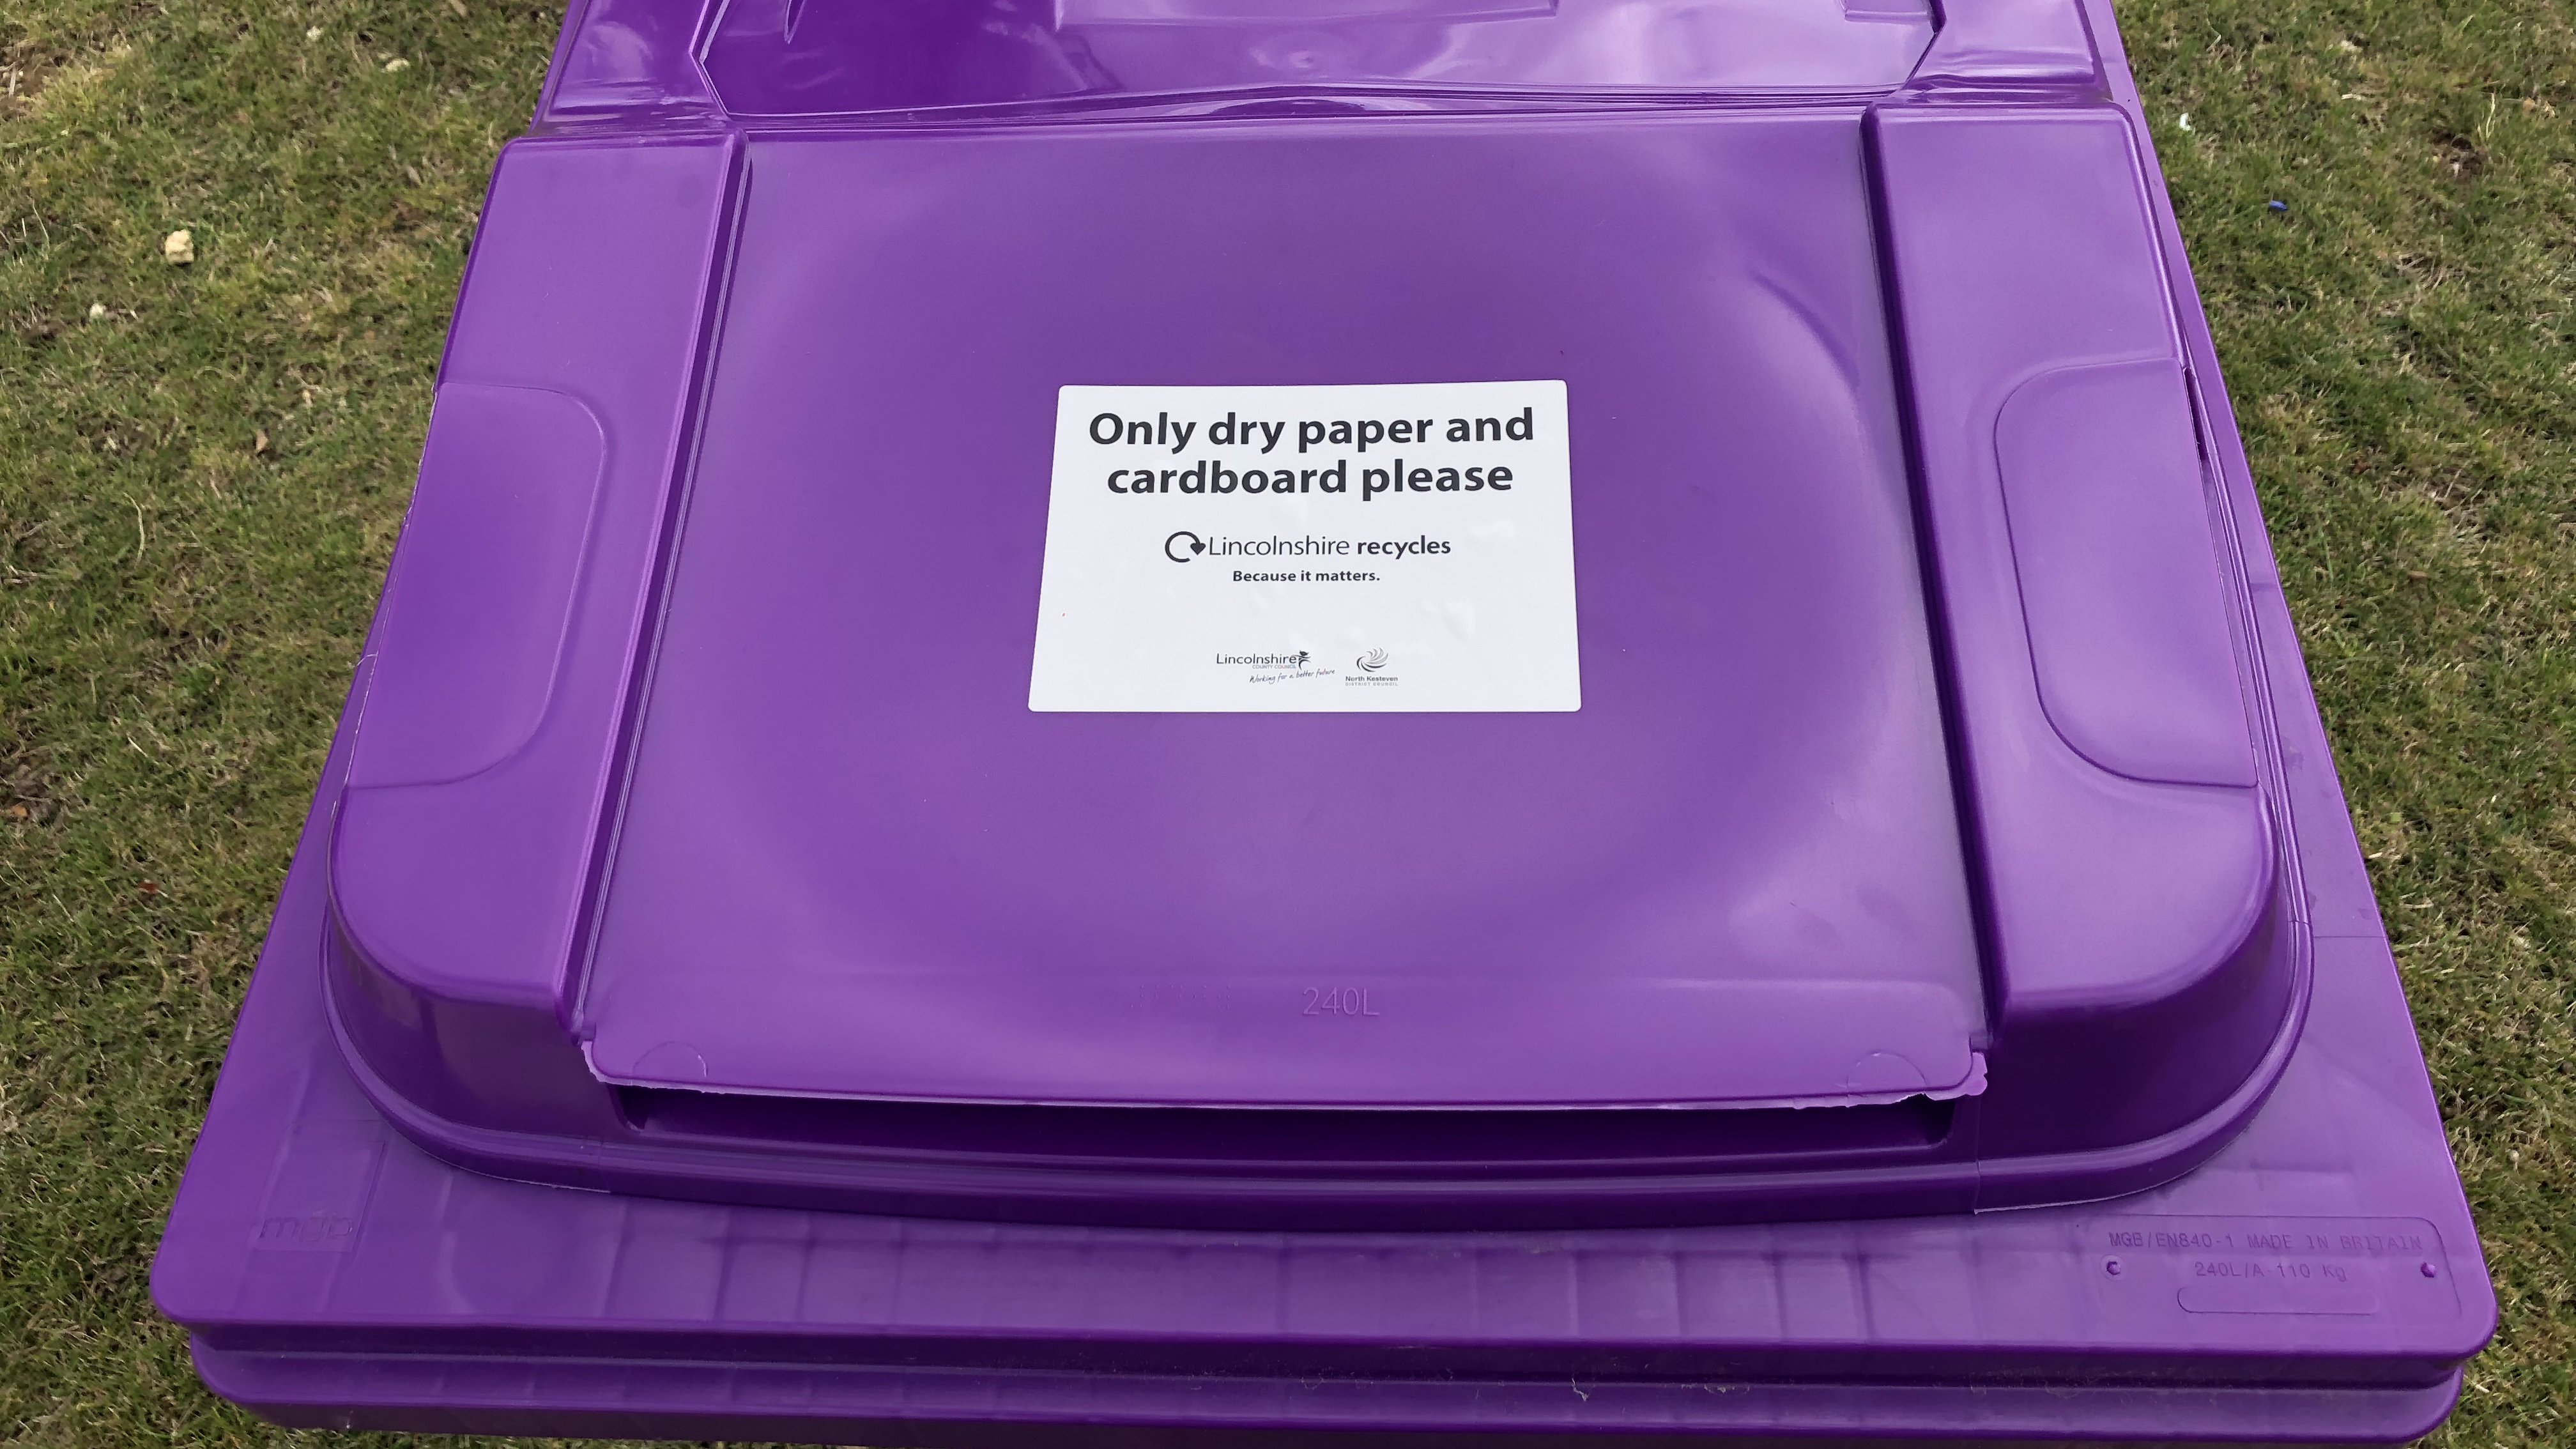 Close up of purple bin and trial label on the lid, asking for just card and paper